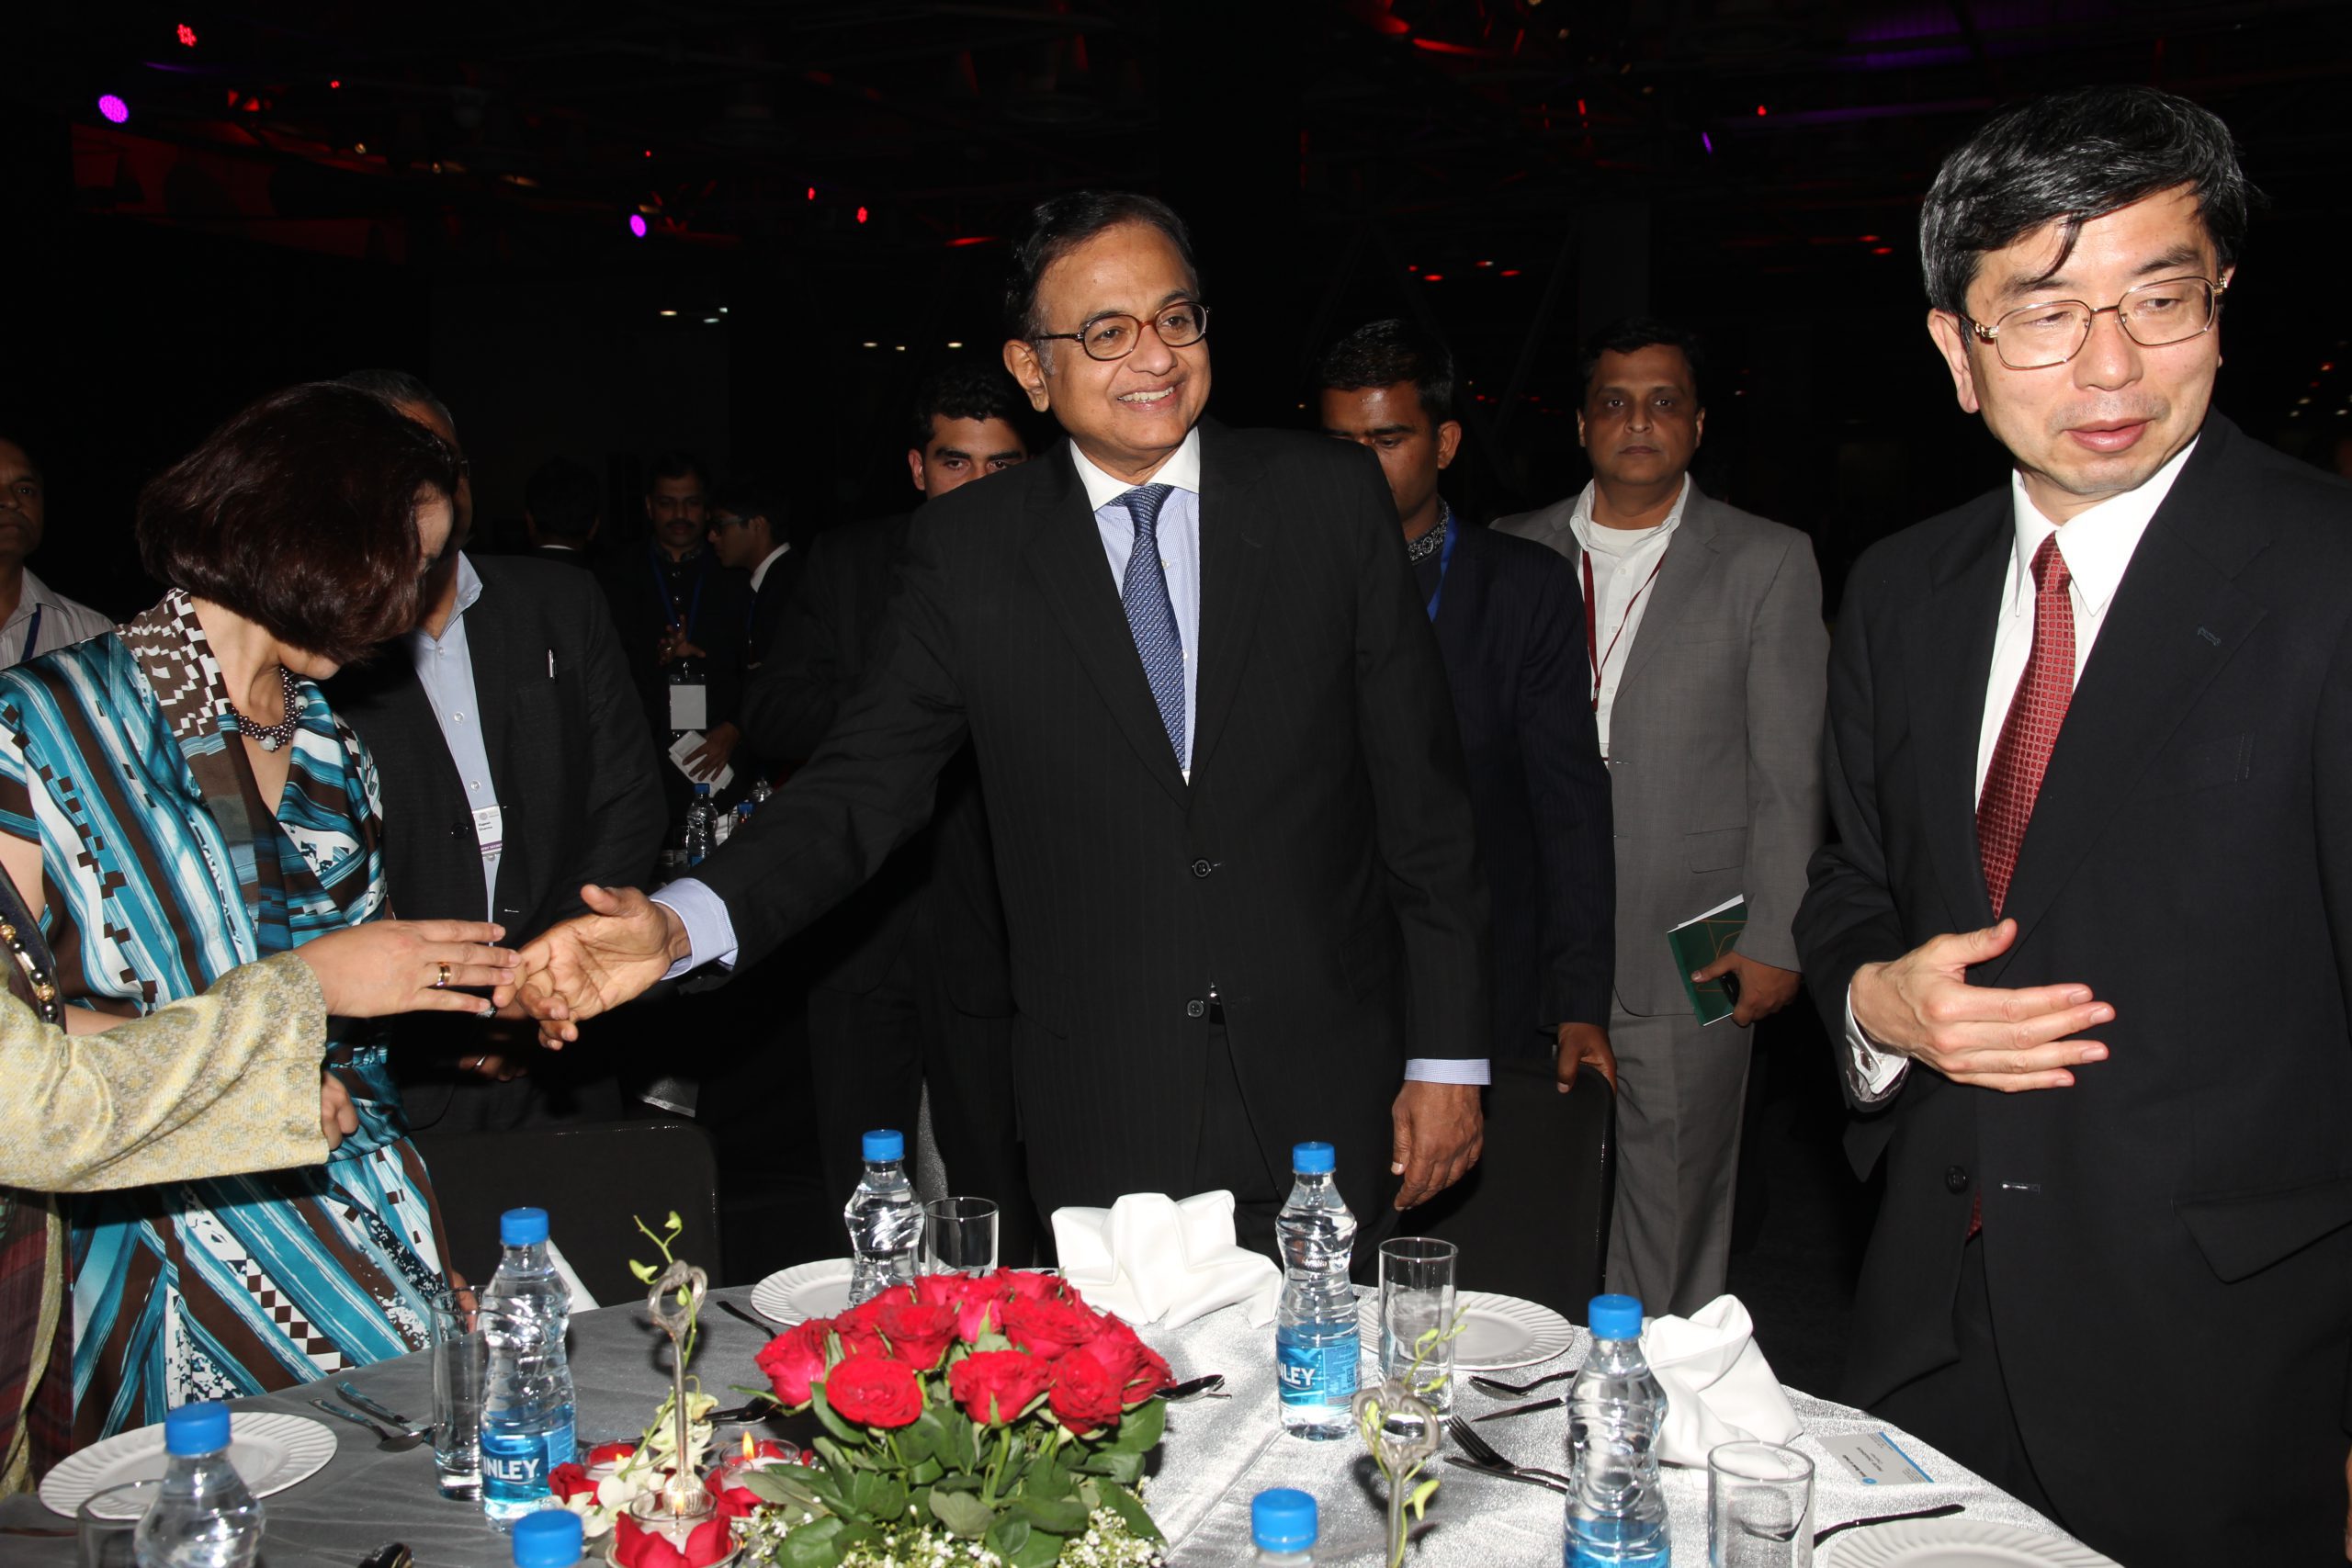 ADB Summit, a cultural banquet conceptualised by Seher for Govt. of India, 2013 with the Minister of Finance Shri P. Chidambaram.